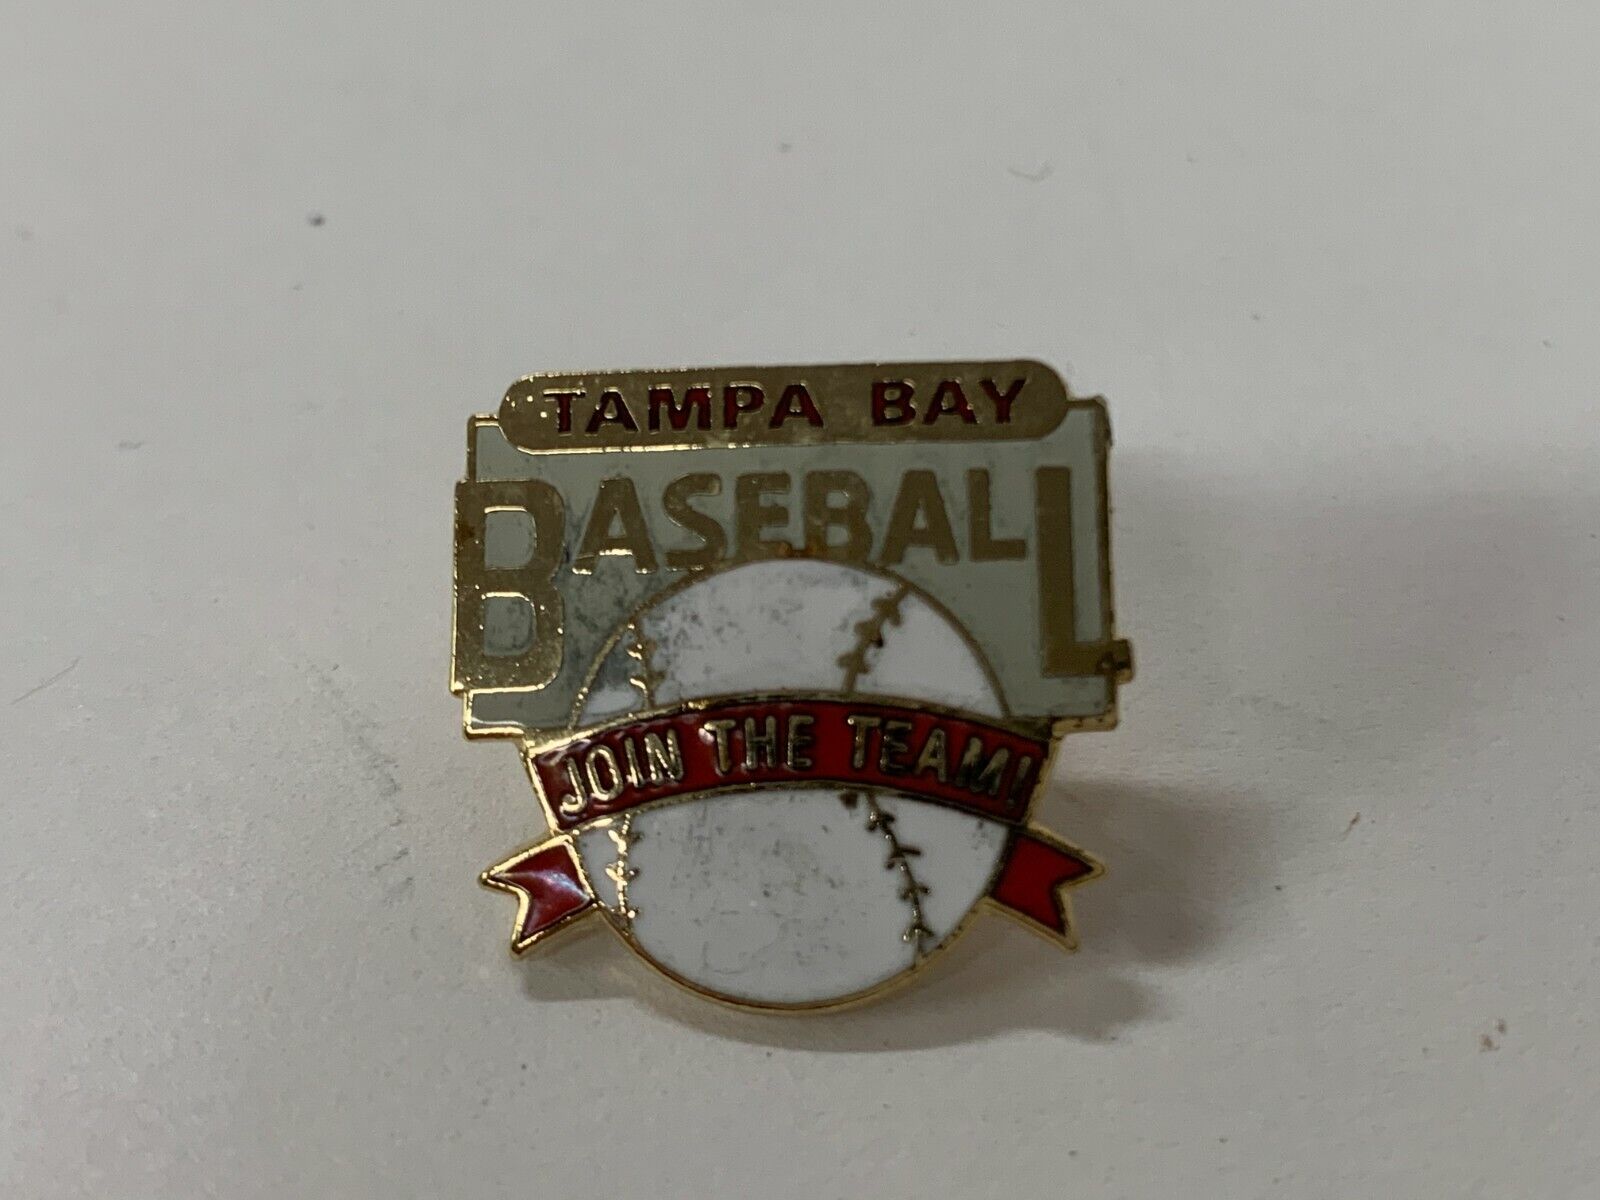 Tampa Bay Rays Baseball Join The Team Collectors Pin Size .75x.75 Inches